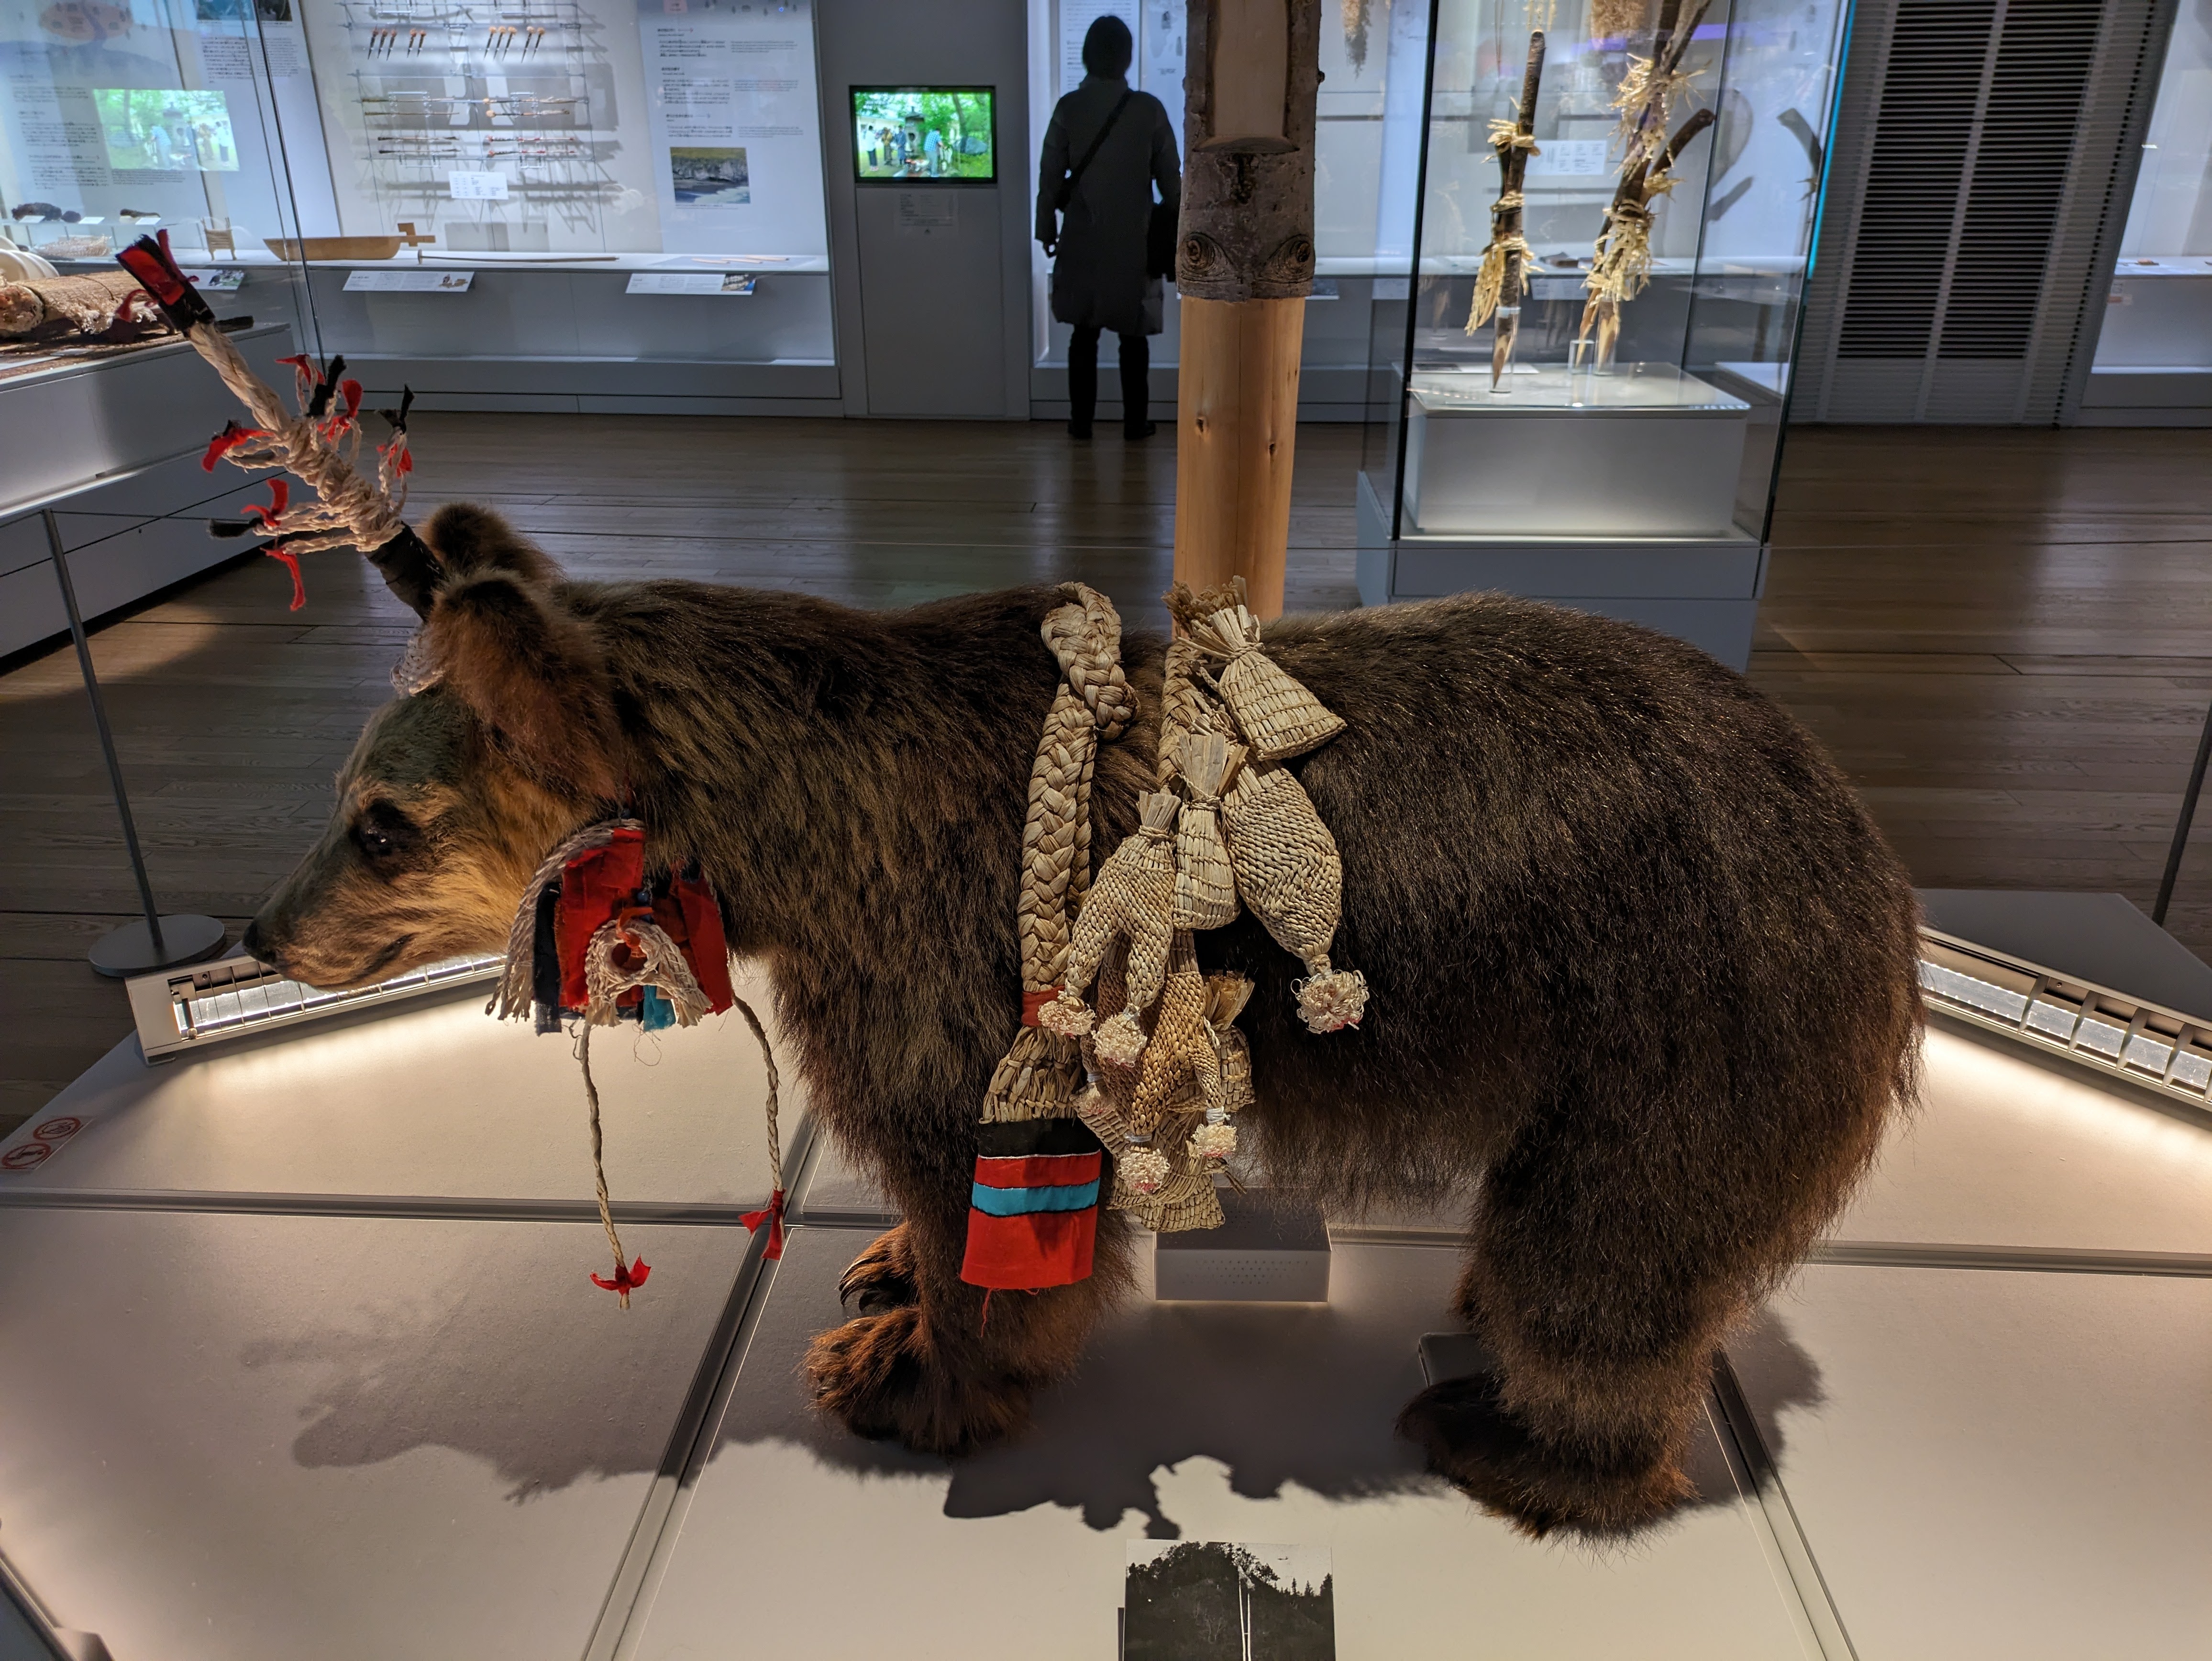 A taxidermy bear on diplay at Upopoy Museum in full iomante attire.